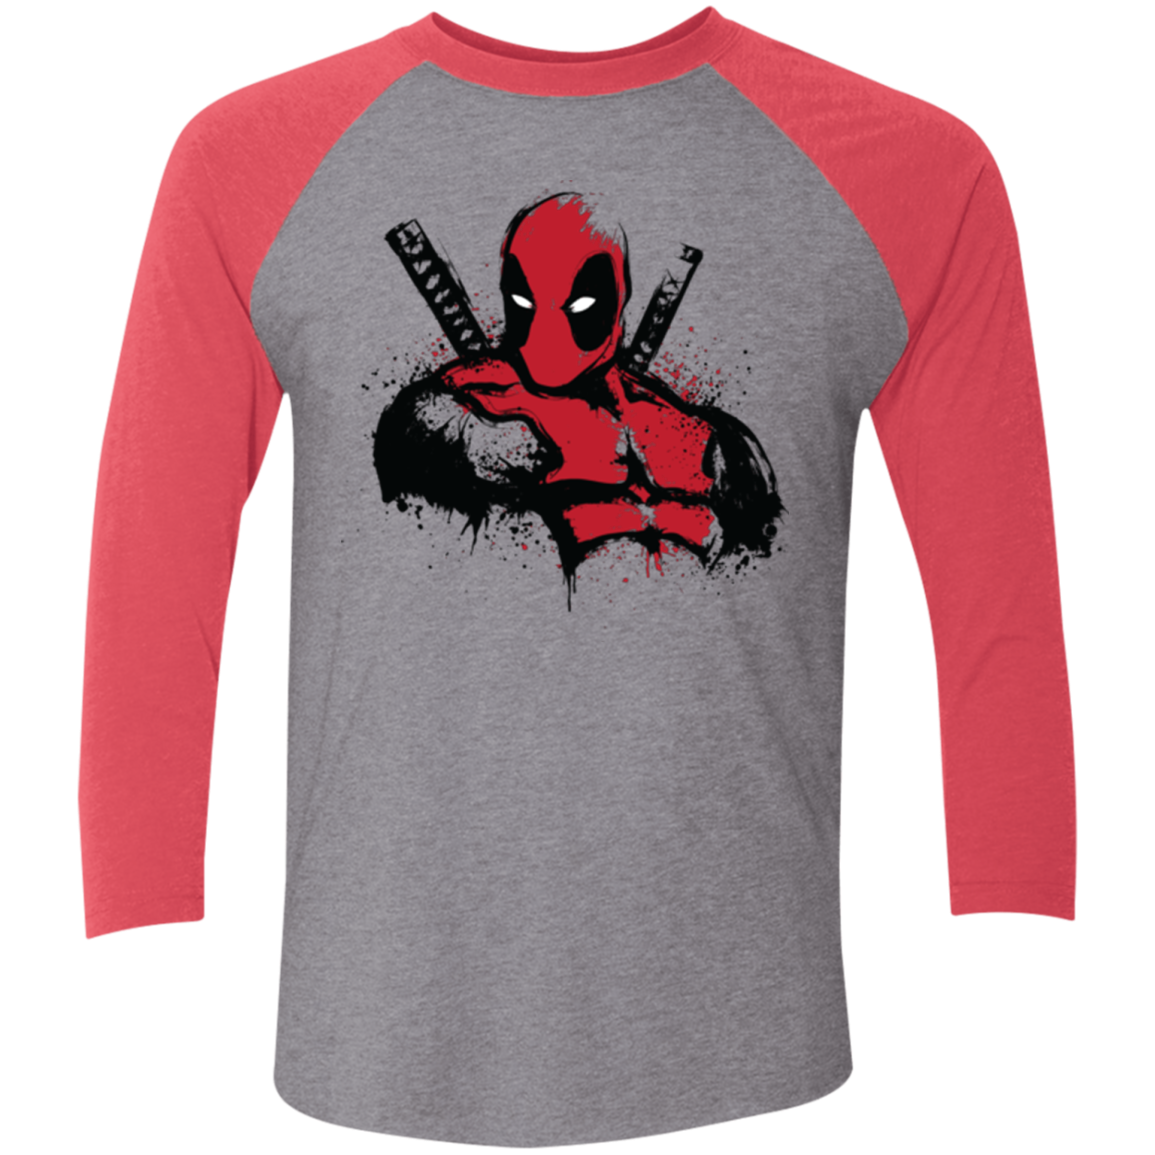 The Merc in Red Men's Triblend 3/4 Sleeve